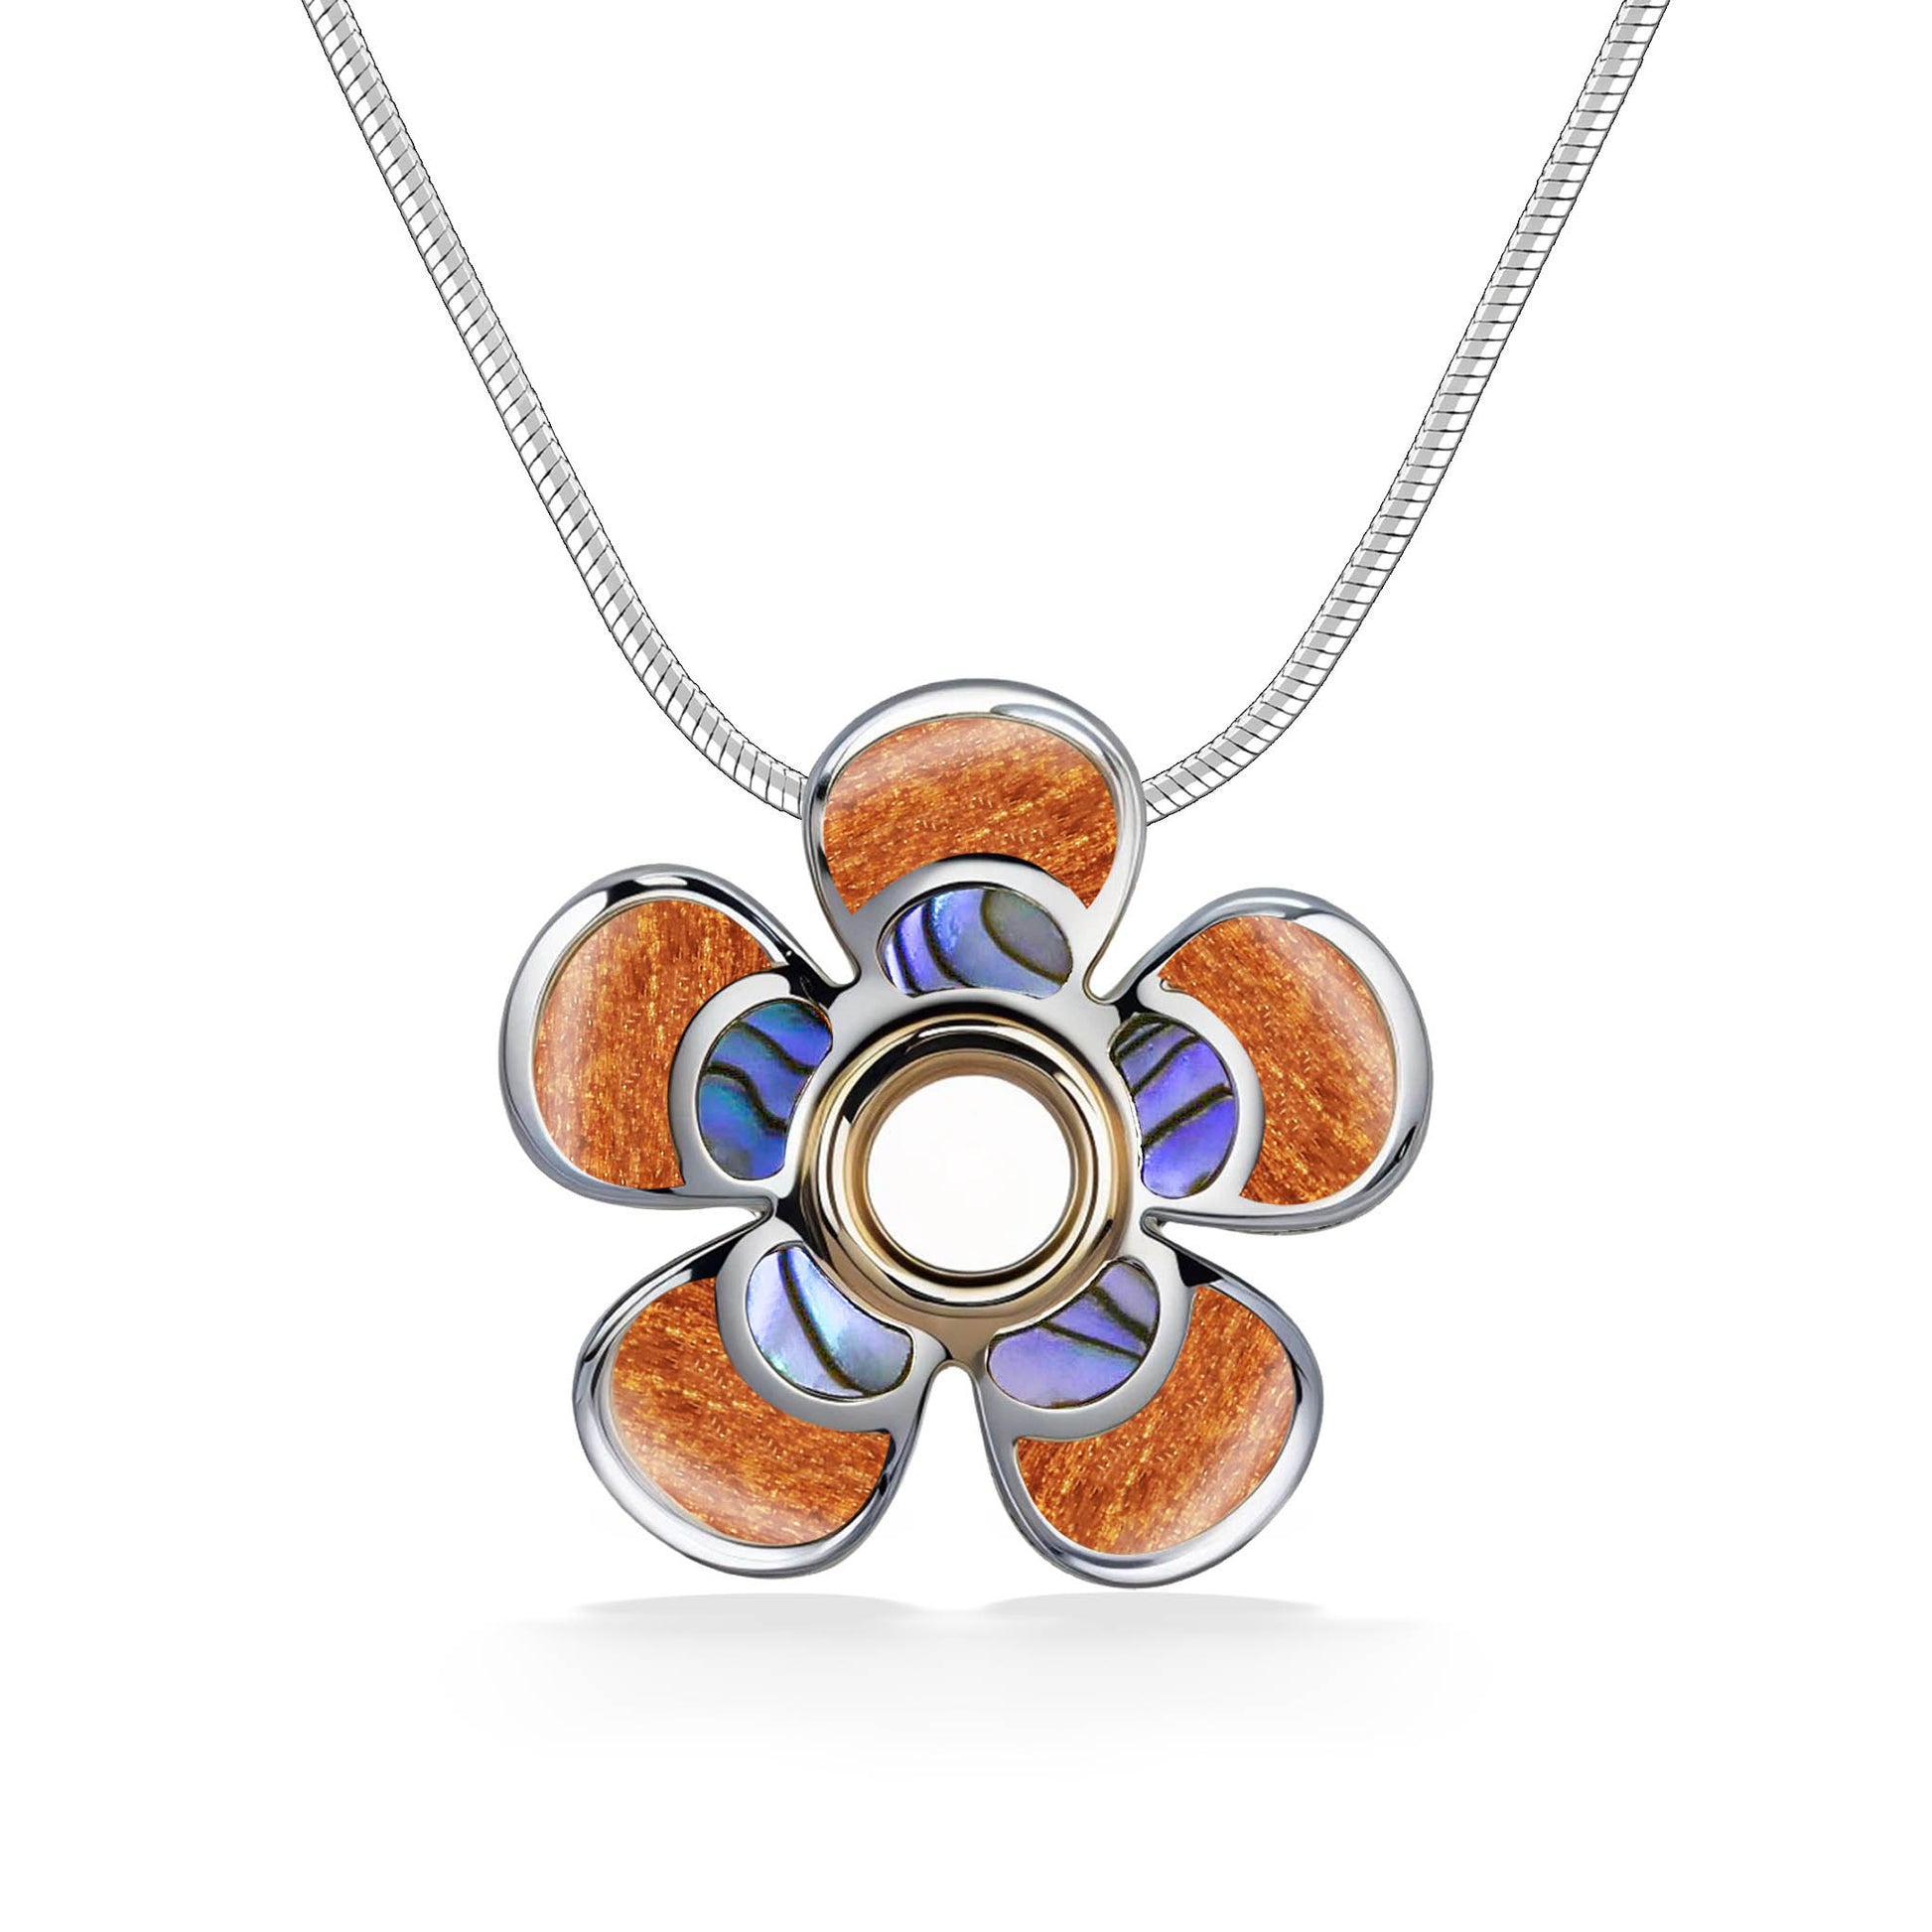 44580 - 18K Yellow Gold and Sterling Silver - Flower Pendant